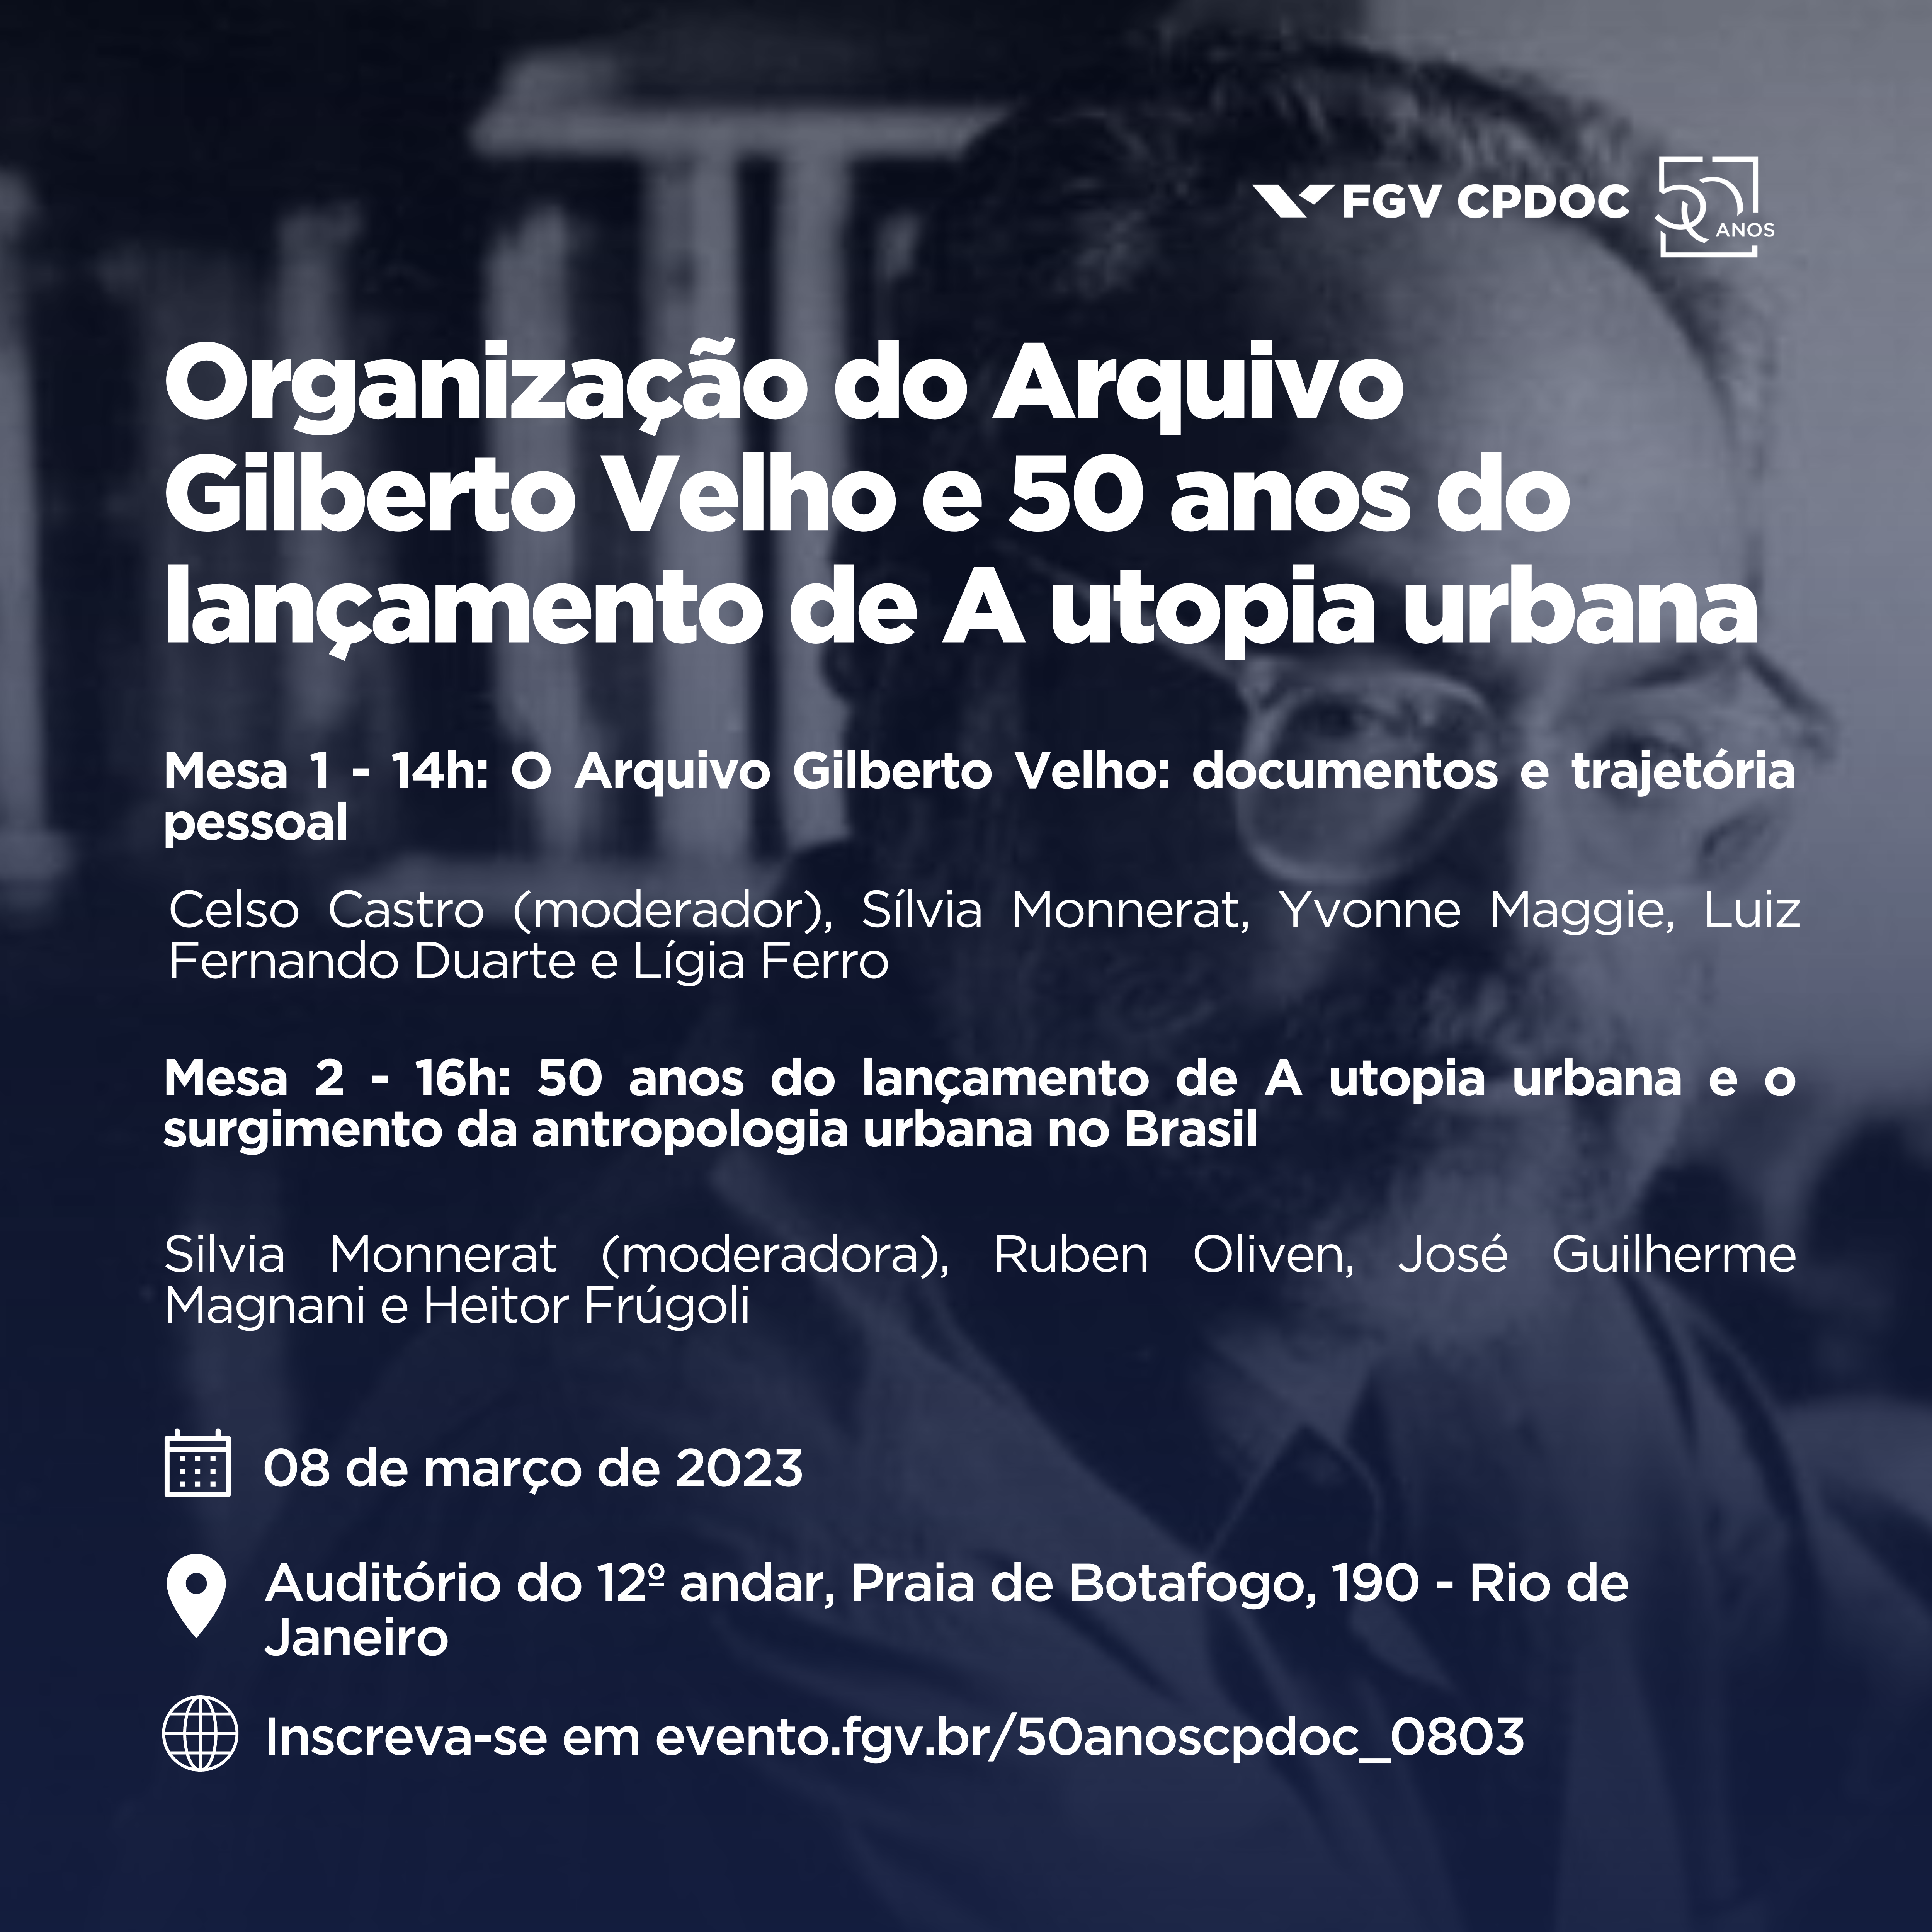 Event at the CPDOC on 3/8/2023: Organization of the Gilberto Velho Archive and 50 years of the release of A Utopia Urbana, with the participation of José Guilherme Magnani and Heitor Frúgoli Jr.